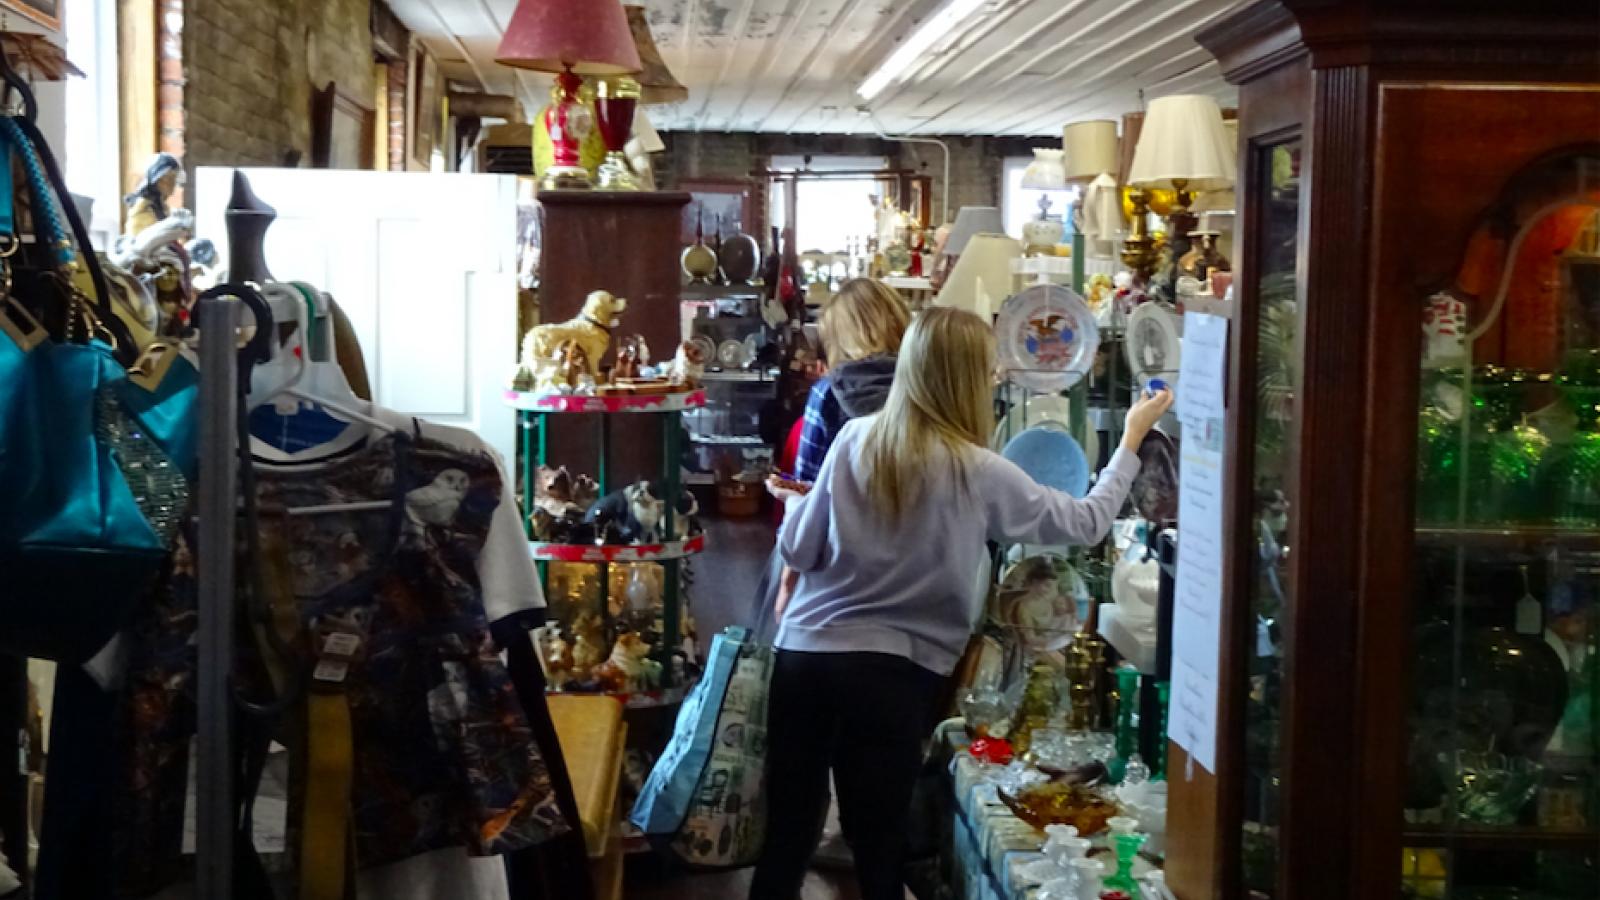 Students shopping for antiques and found objects at Ghosts in the Attic Antique Mall.